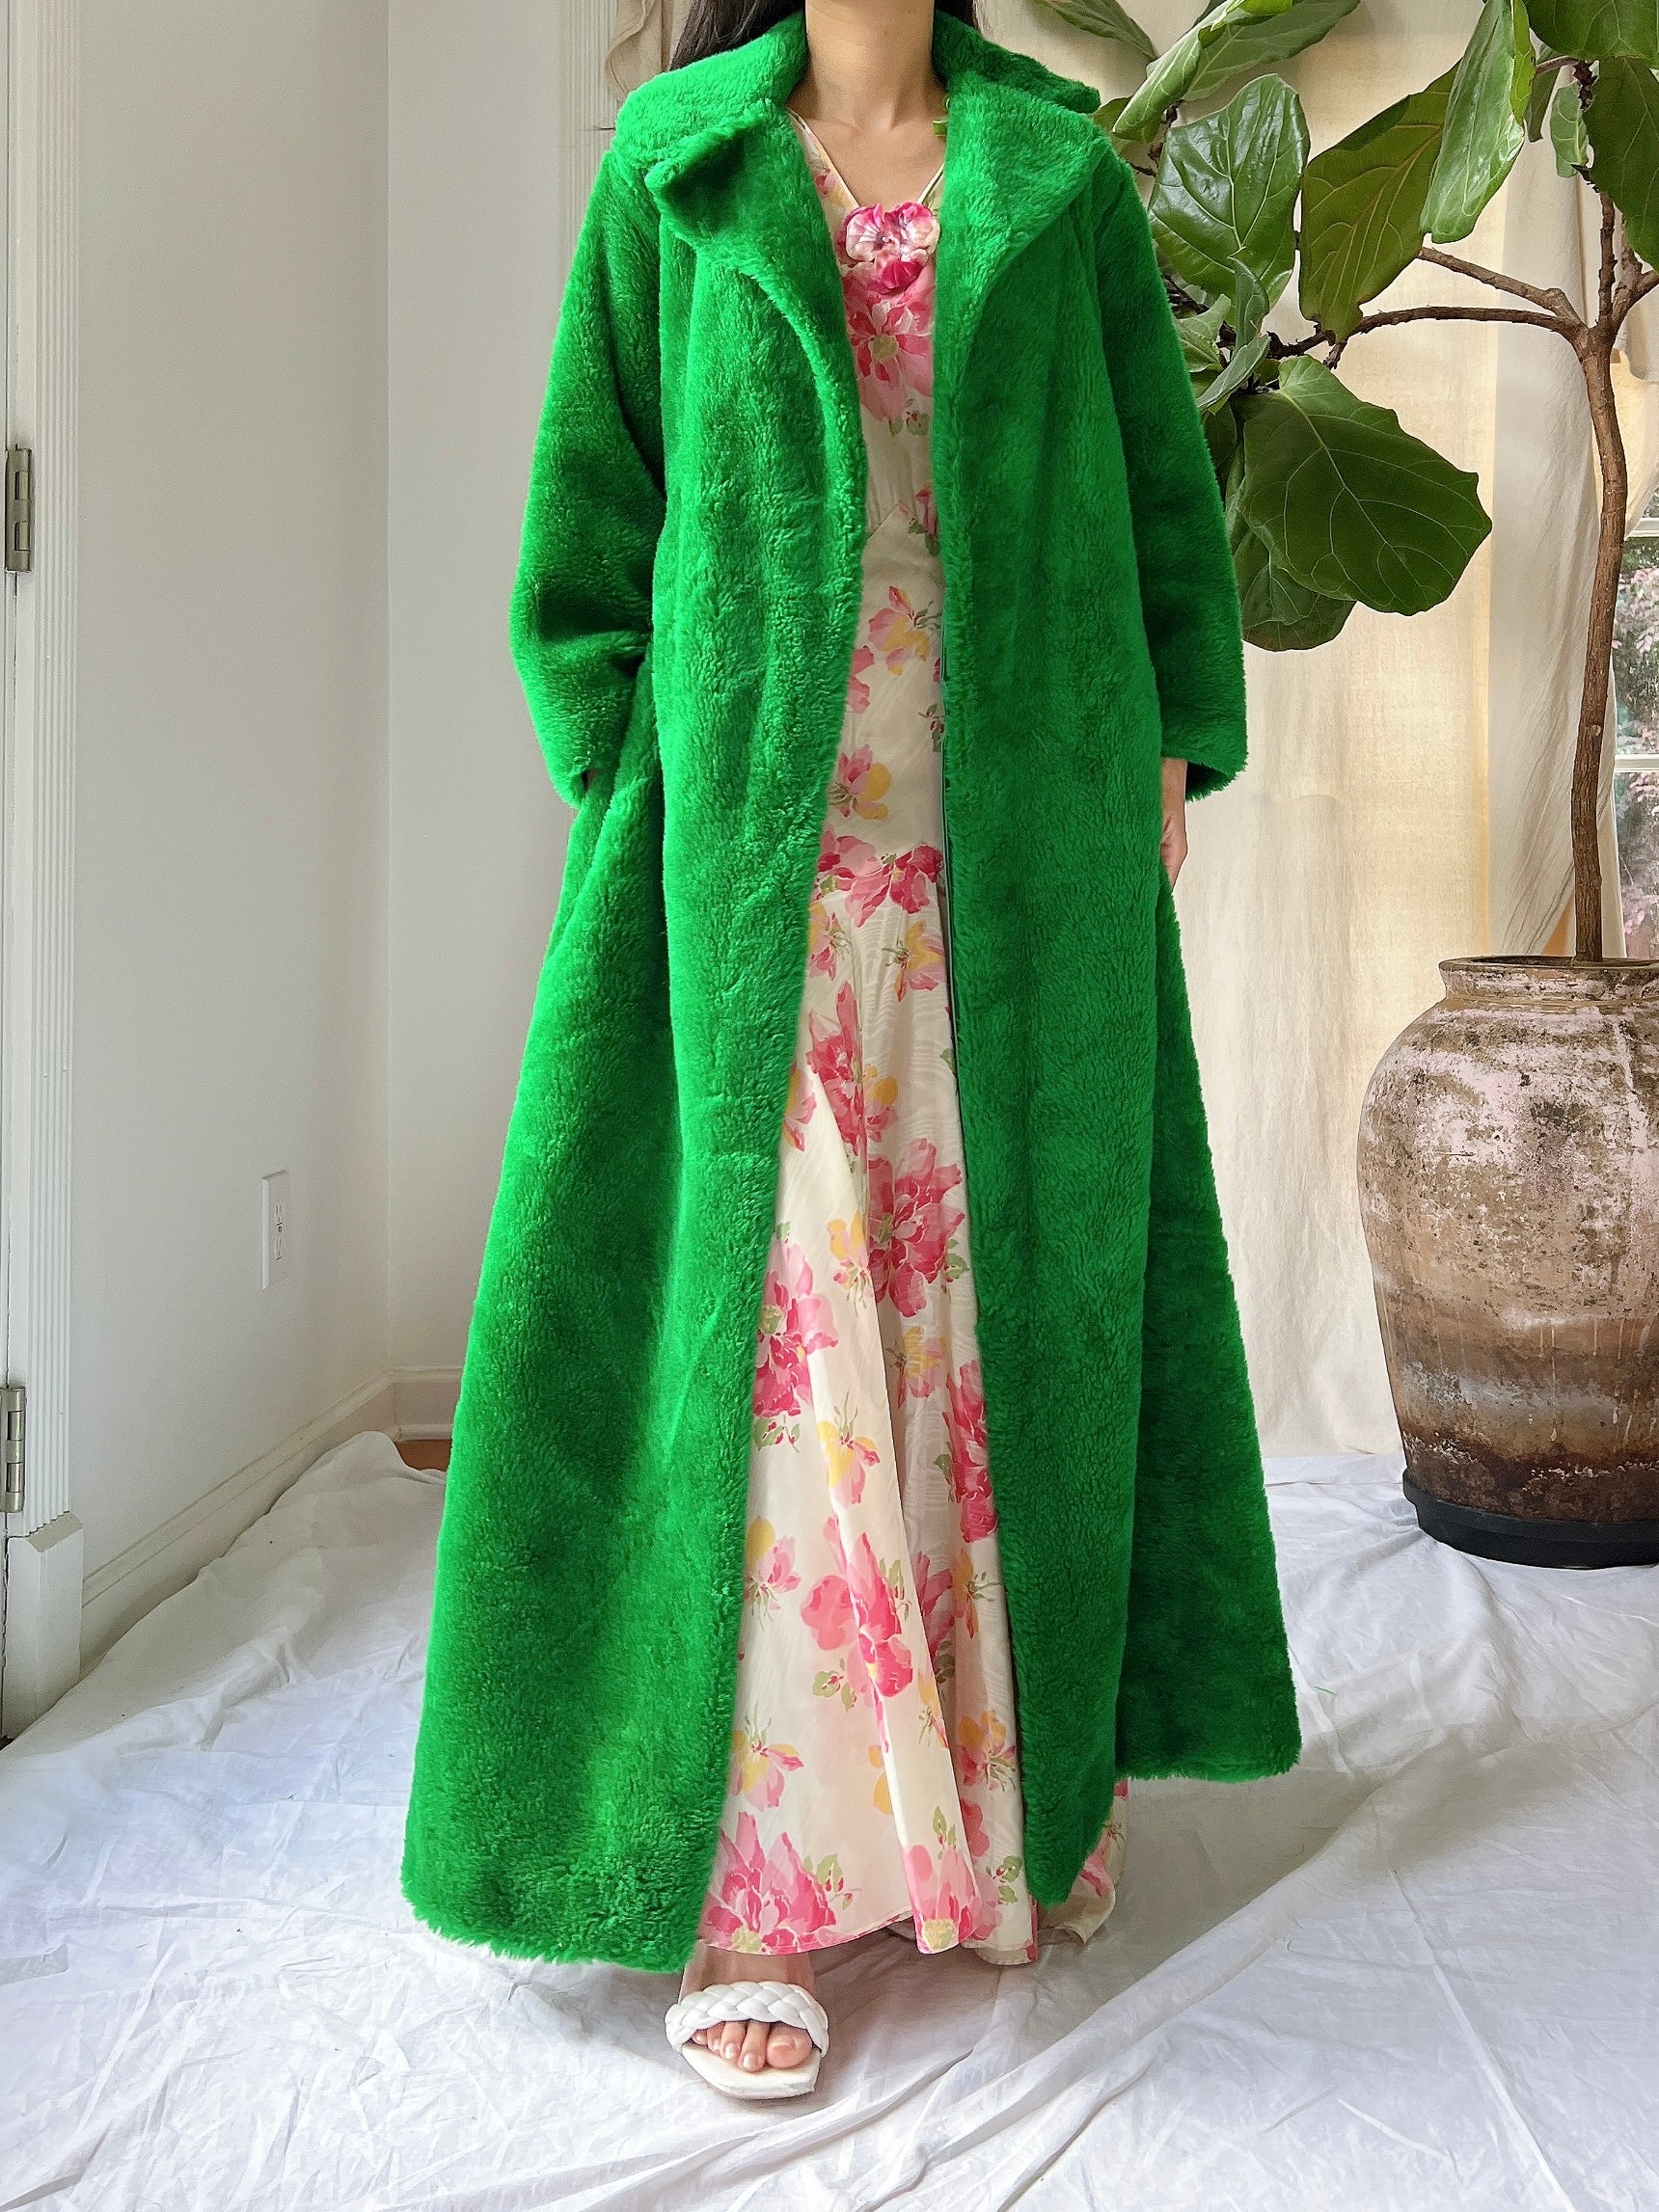 Vintage Green Acrylic Terrycloth Duster - M